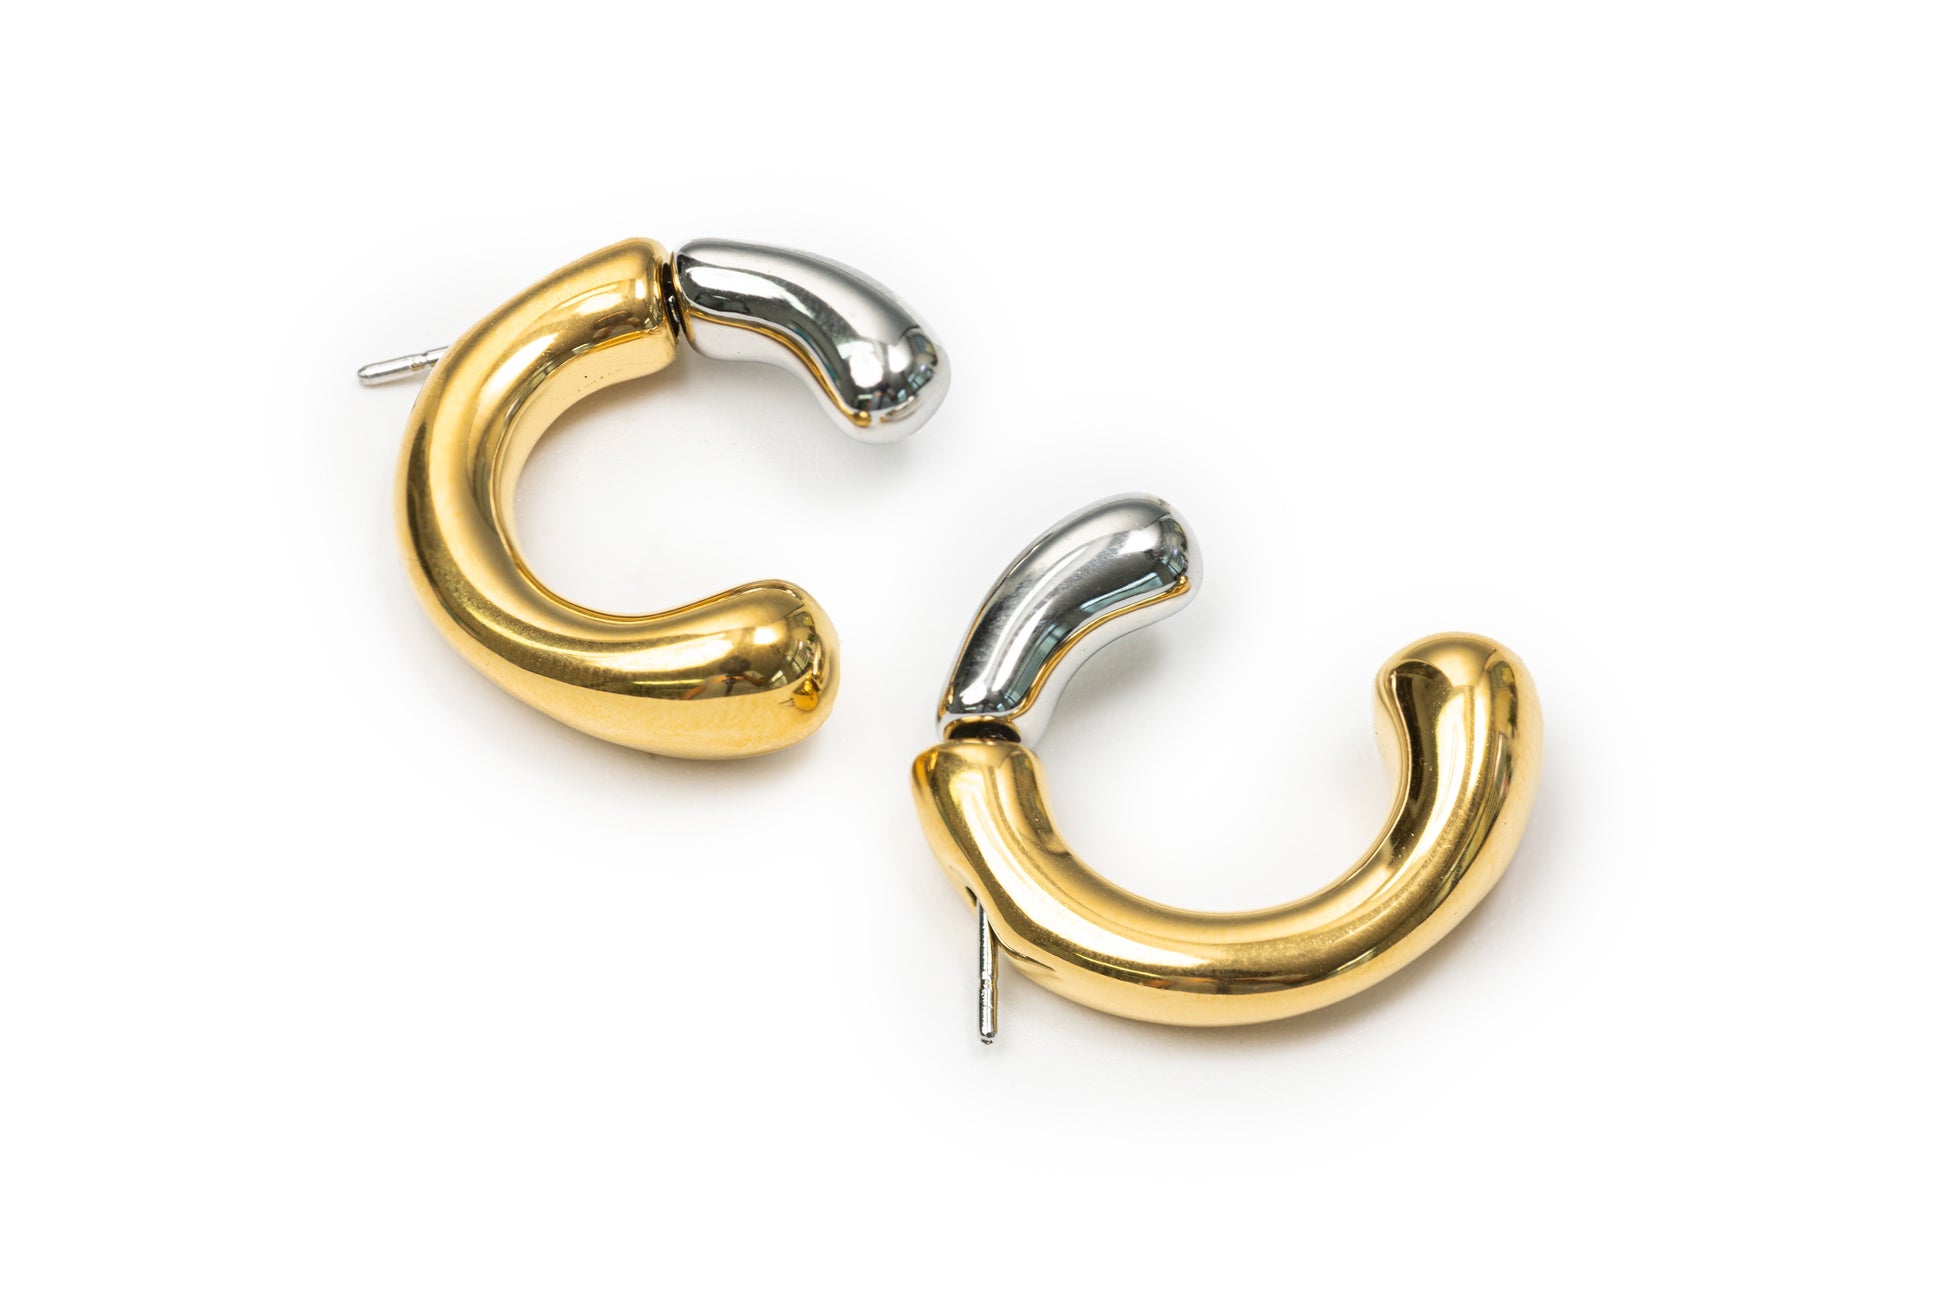 Planderful Golden Hoops with Silver Lifts